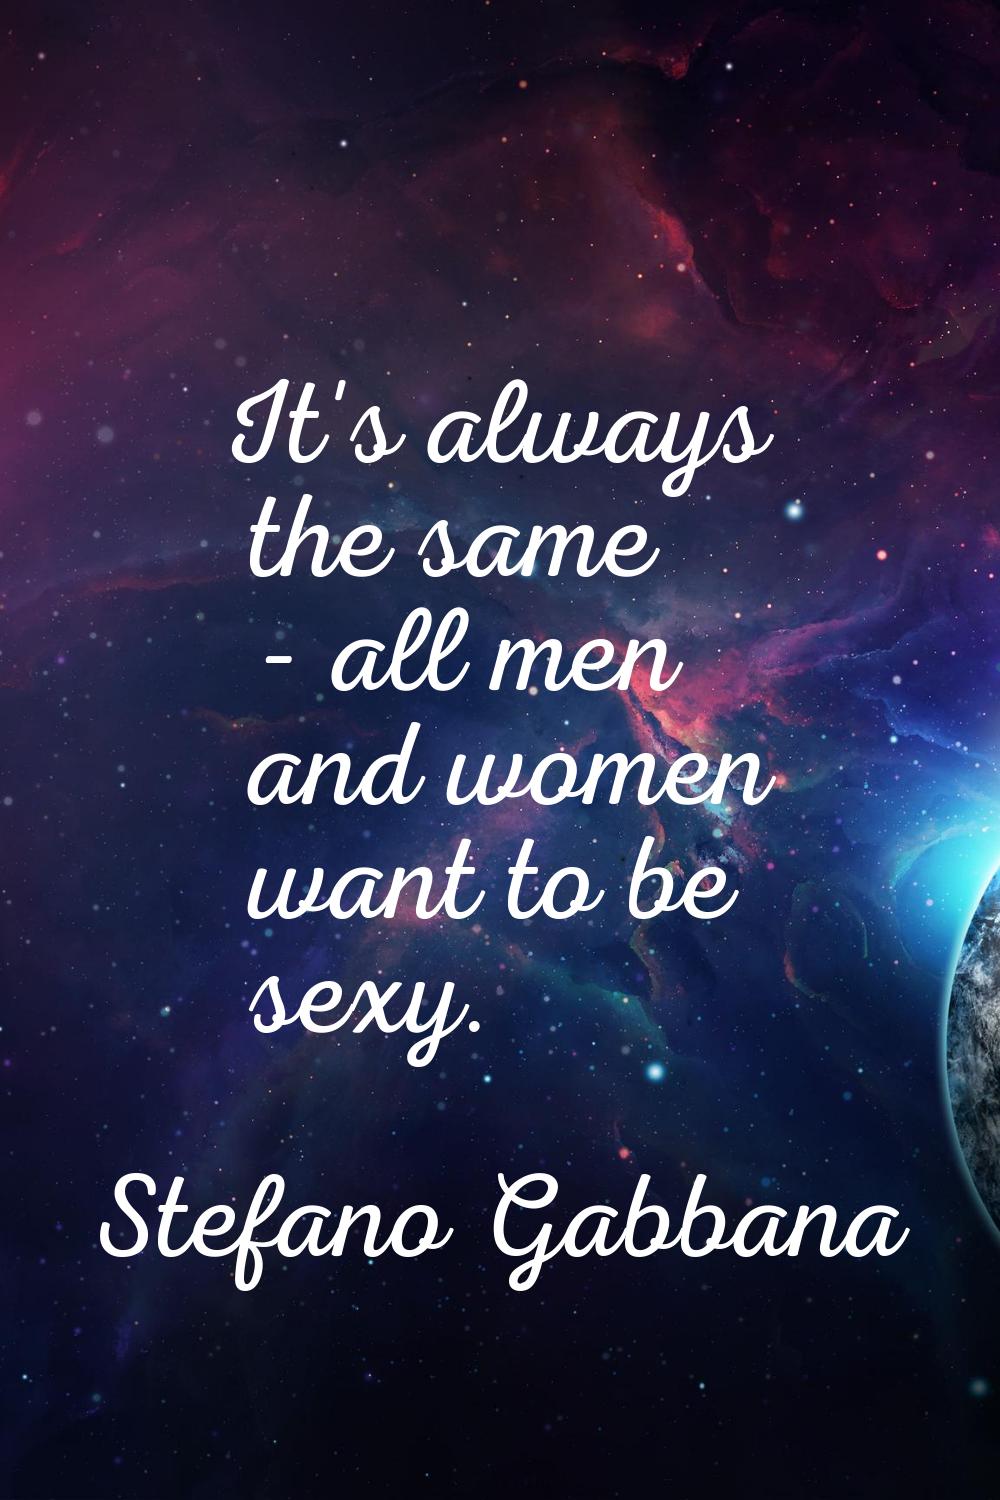 It's always the same - all men and women want to be sexy.